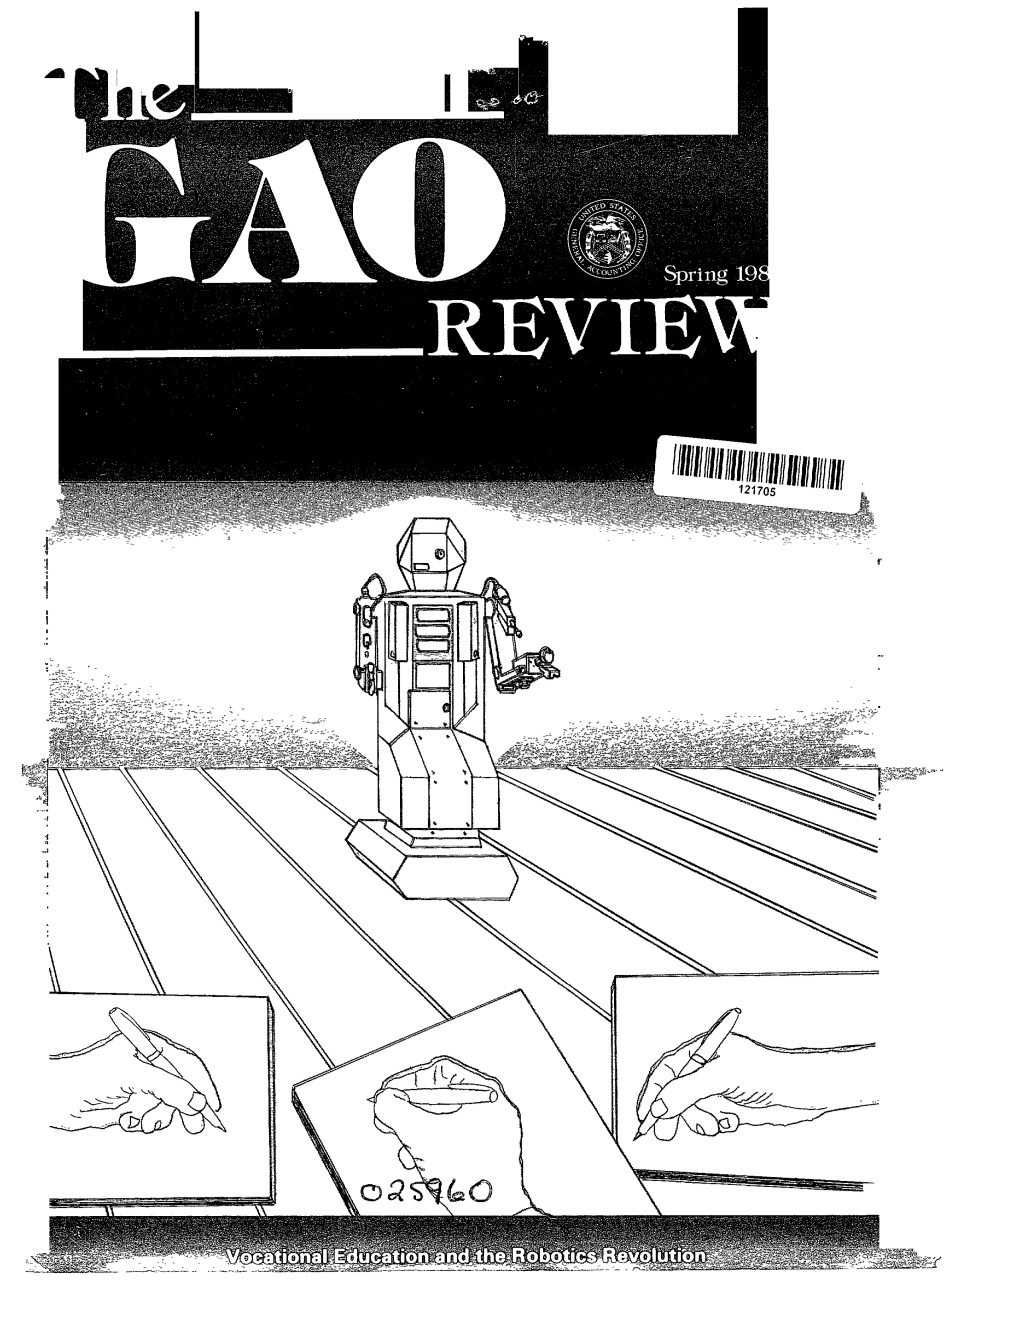 The GAO Review, Vol. 18, Issue 2, Spring 1983